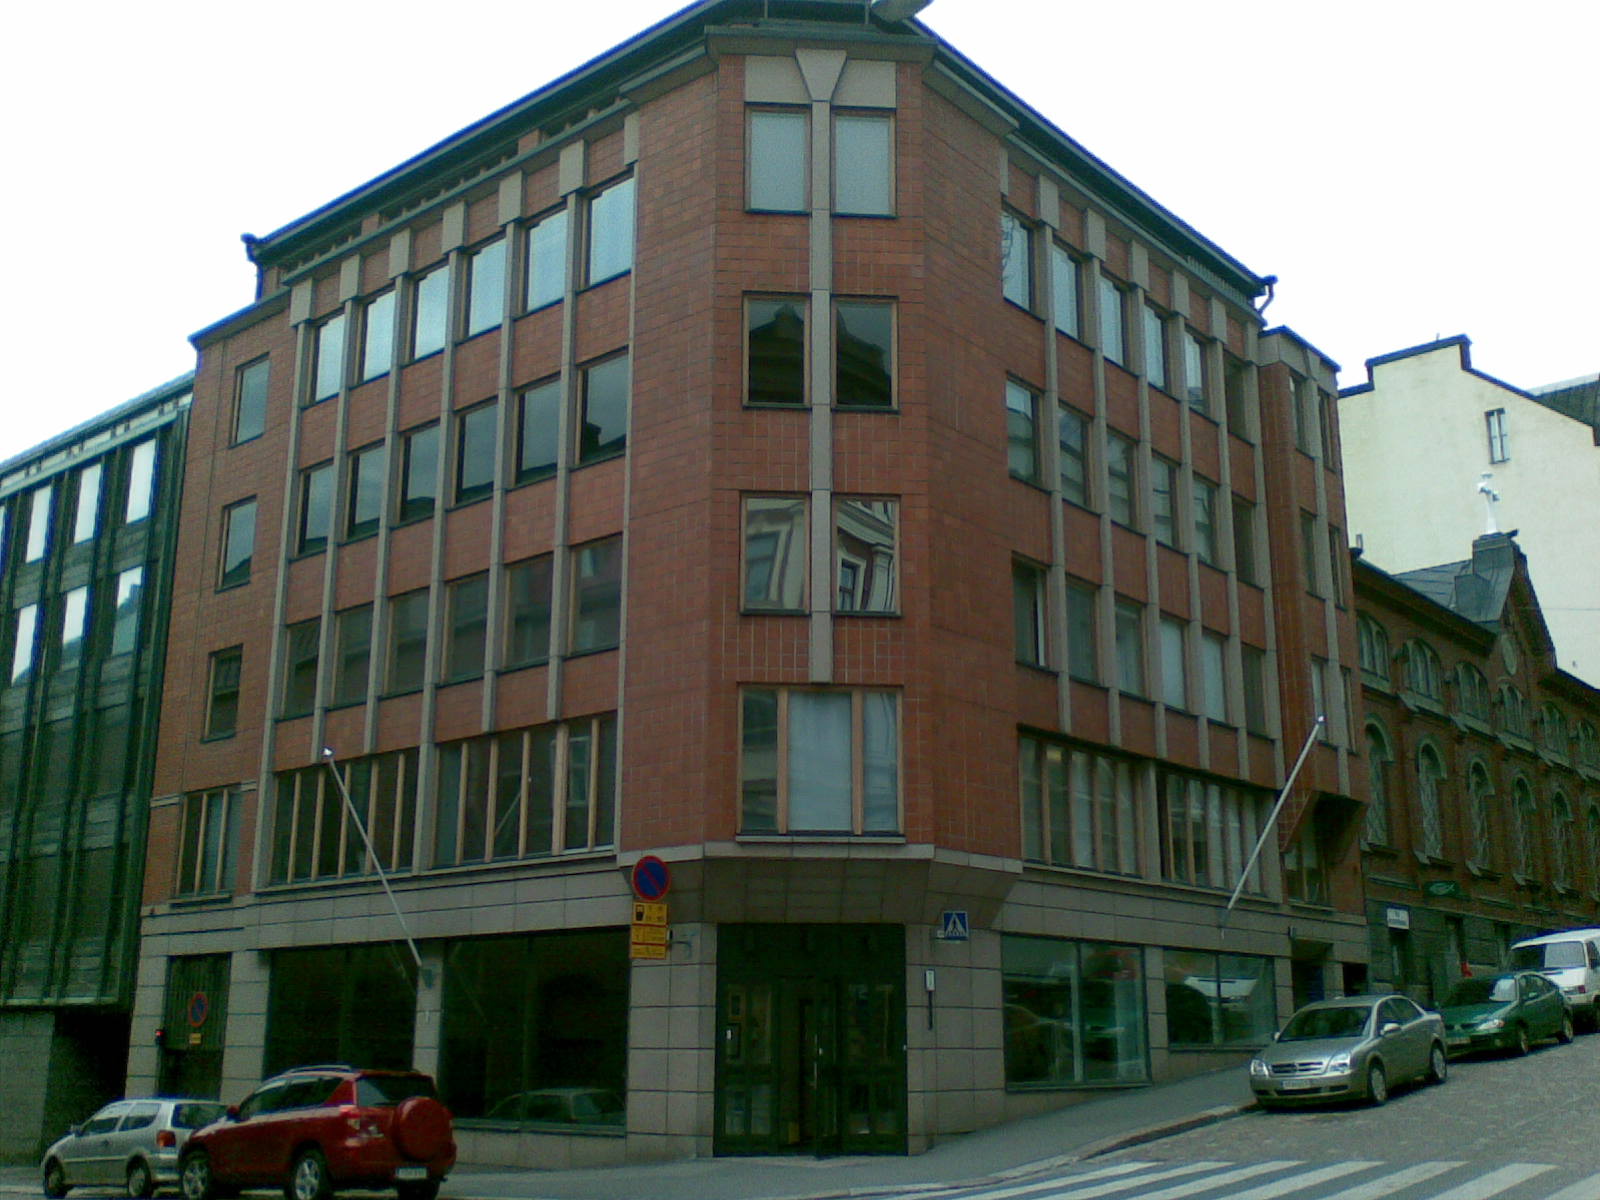 a brick building with two levels, some cars are on the street